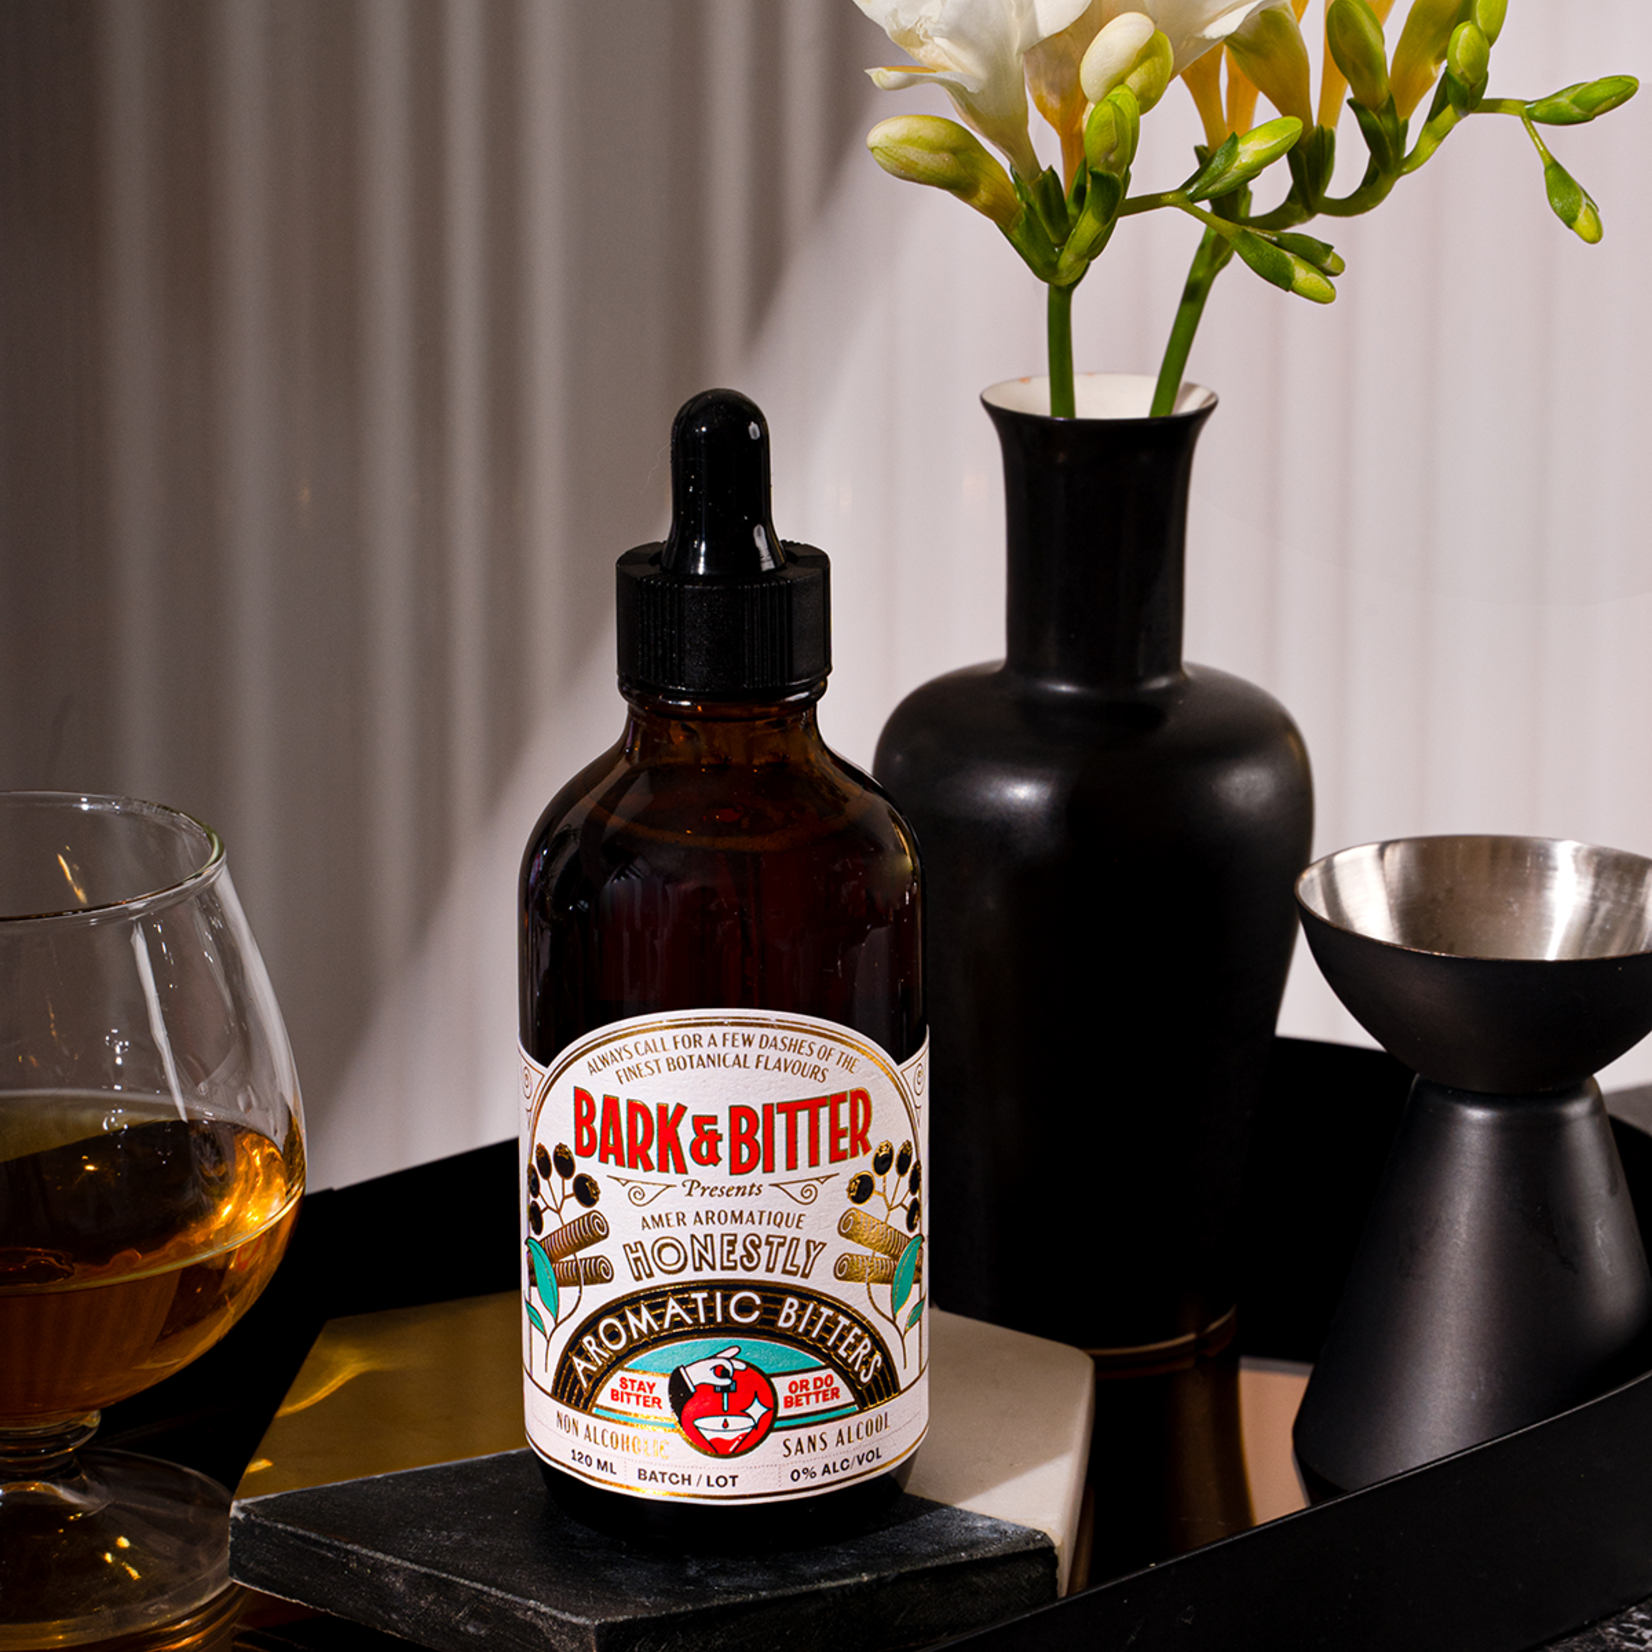 Bark & Bitter Alcohol Free Honestly Aromatic Bitters